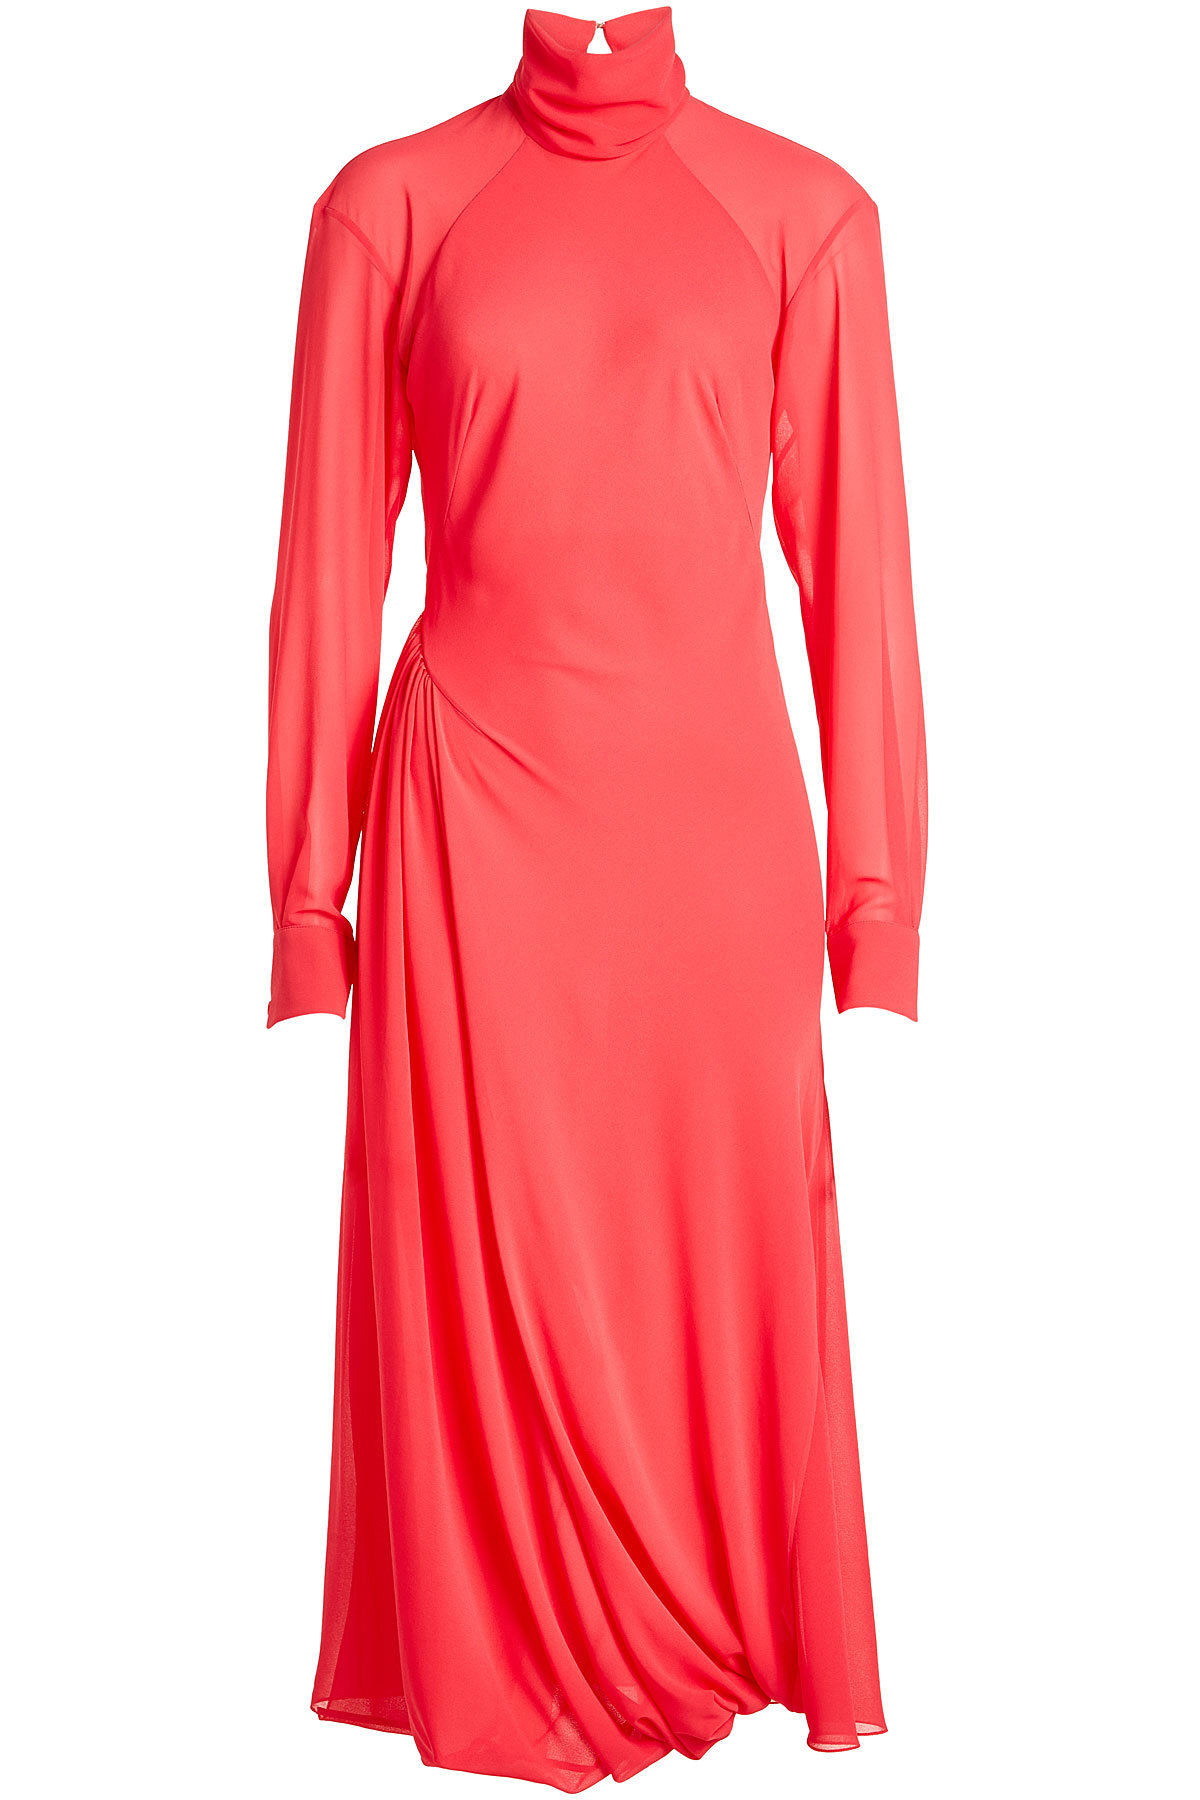 Draped Dress with Turtleneck by Victoria Beckham